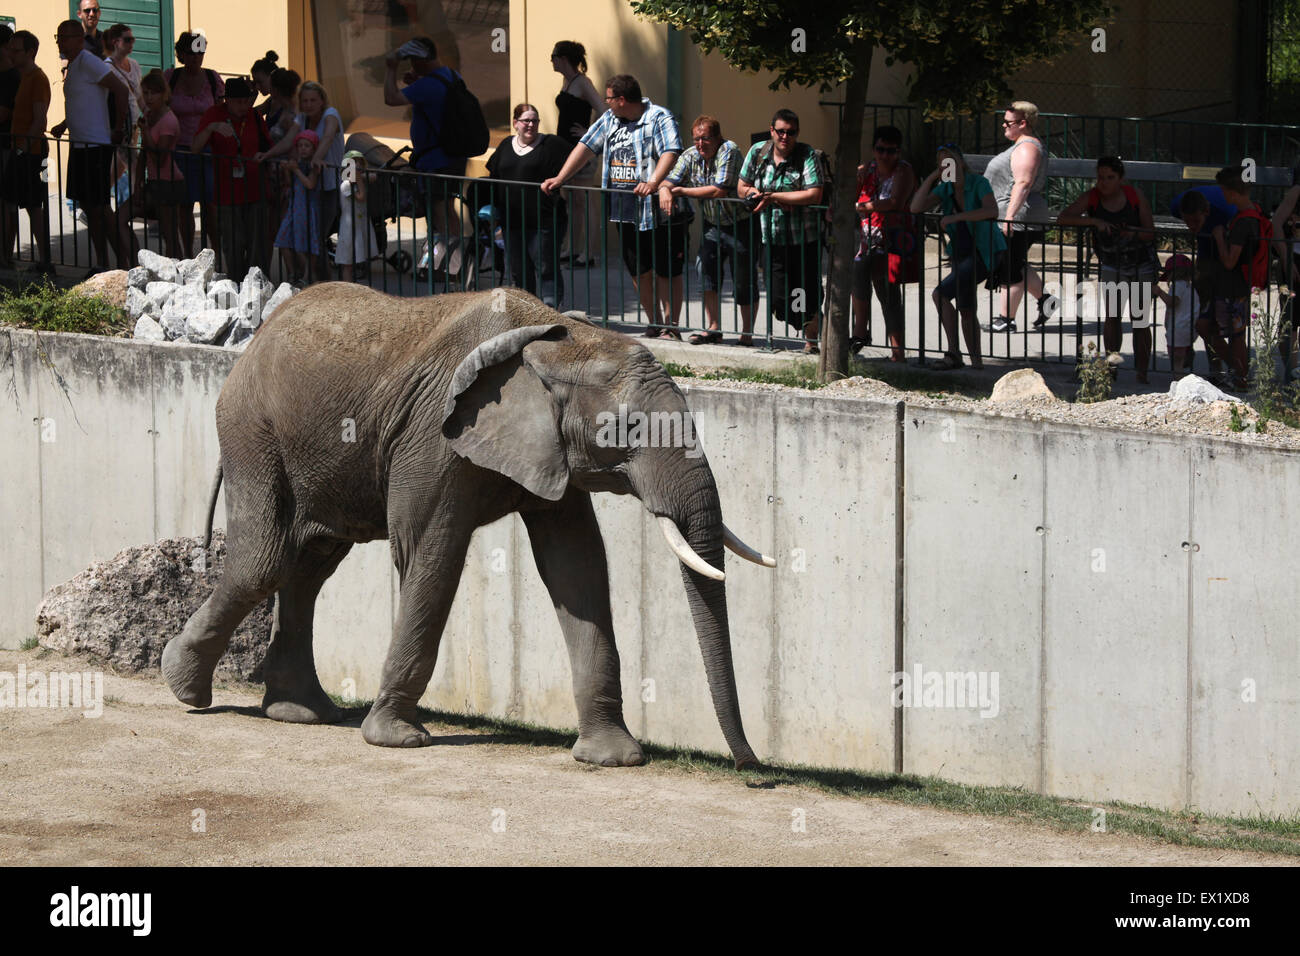 Visitors look at the African bush elephant (Loxodonta africana) at Schönbrunn Zoo in Vienna, Austria. Stock Photo